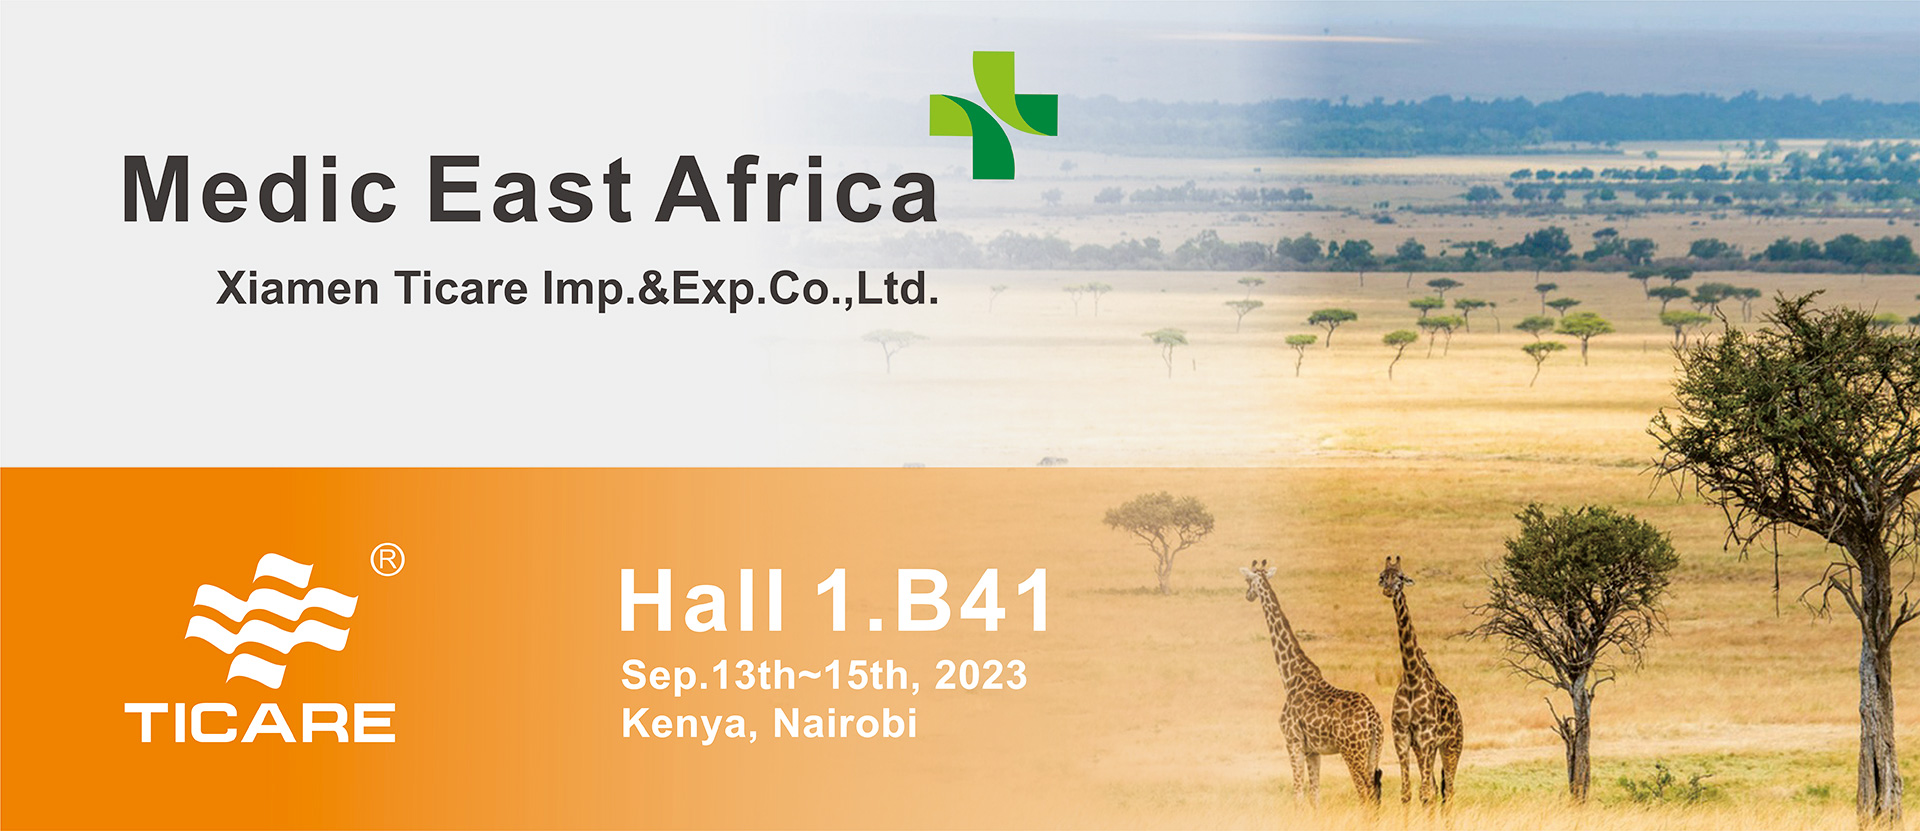 Welcome to Hall 1.B41, Medic East Africa!